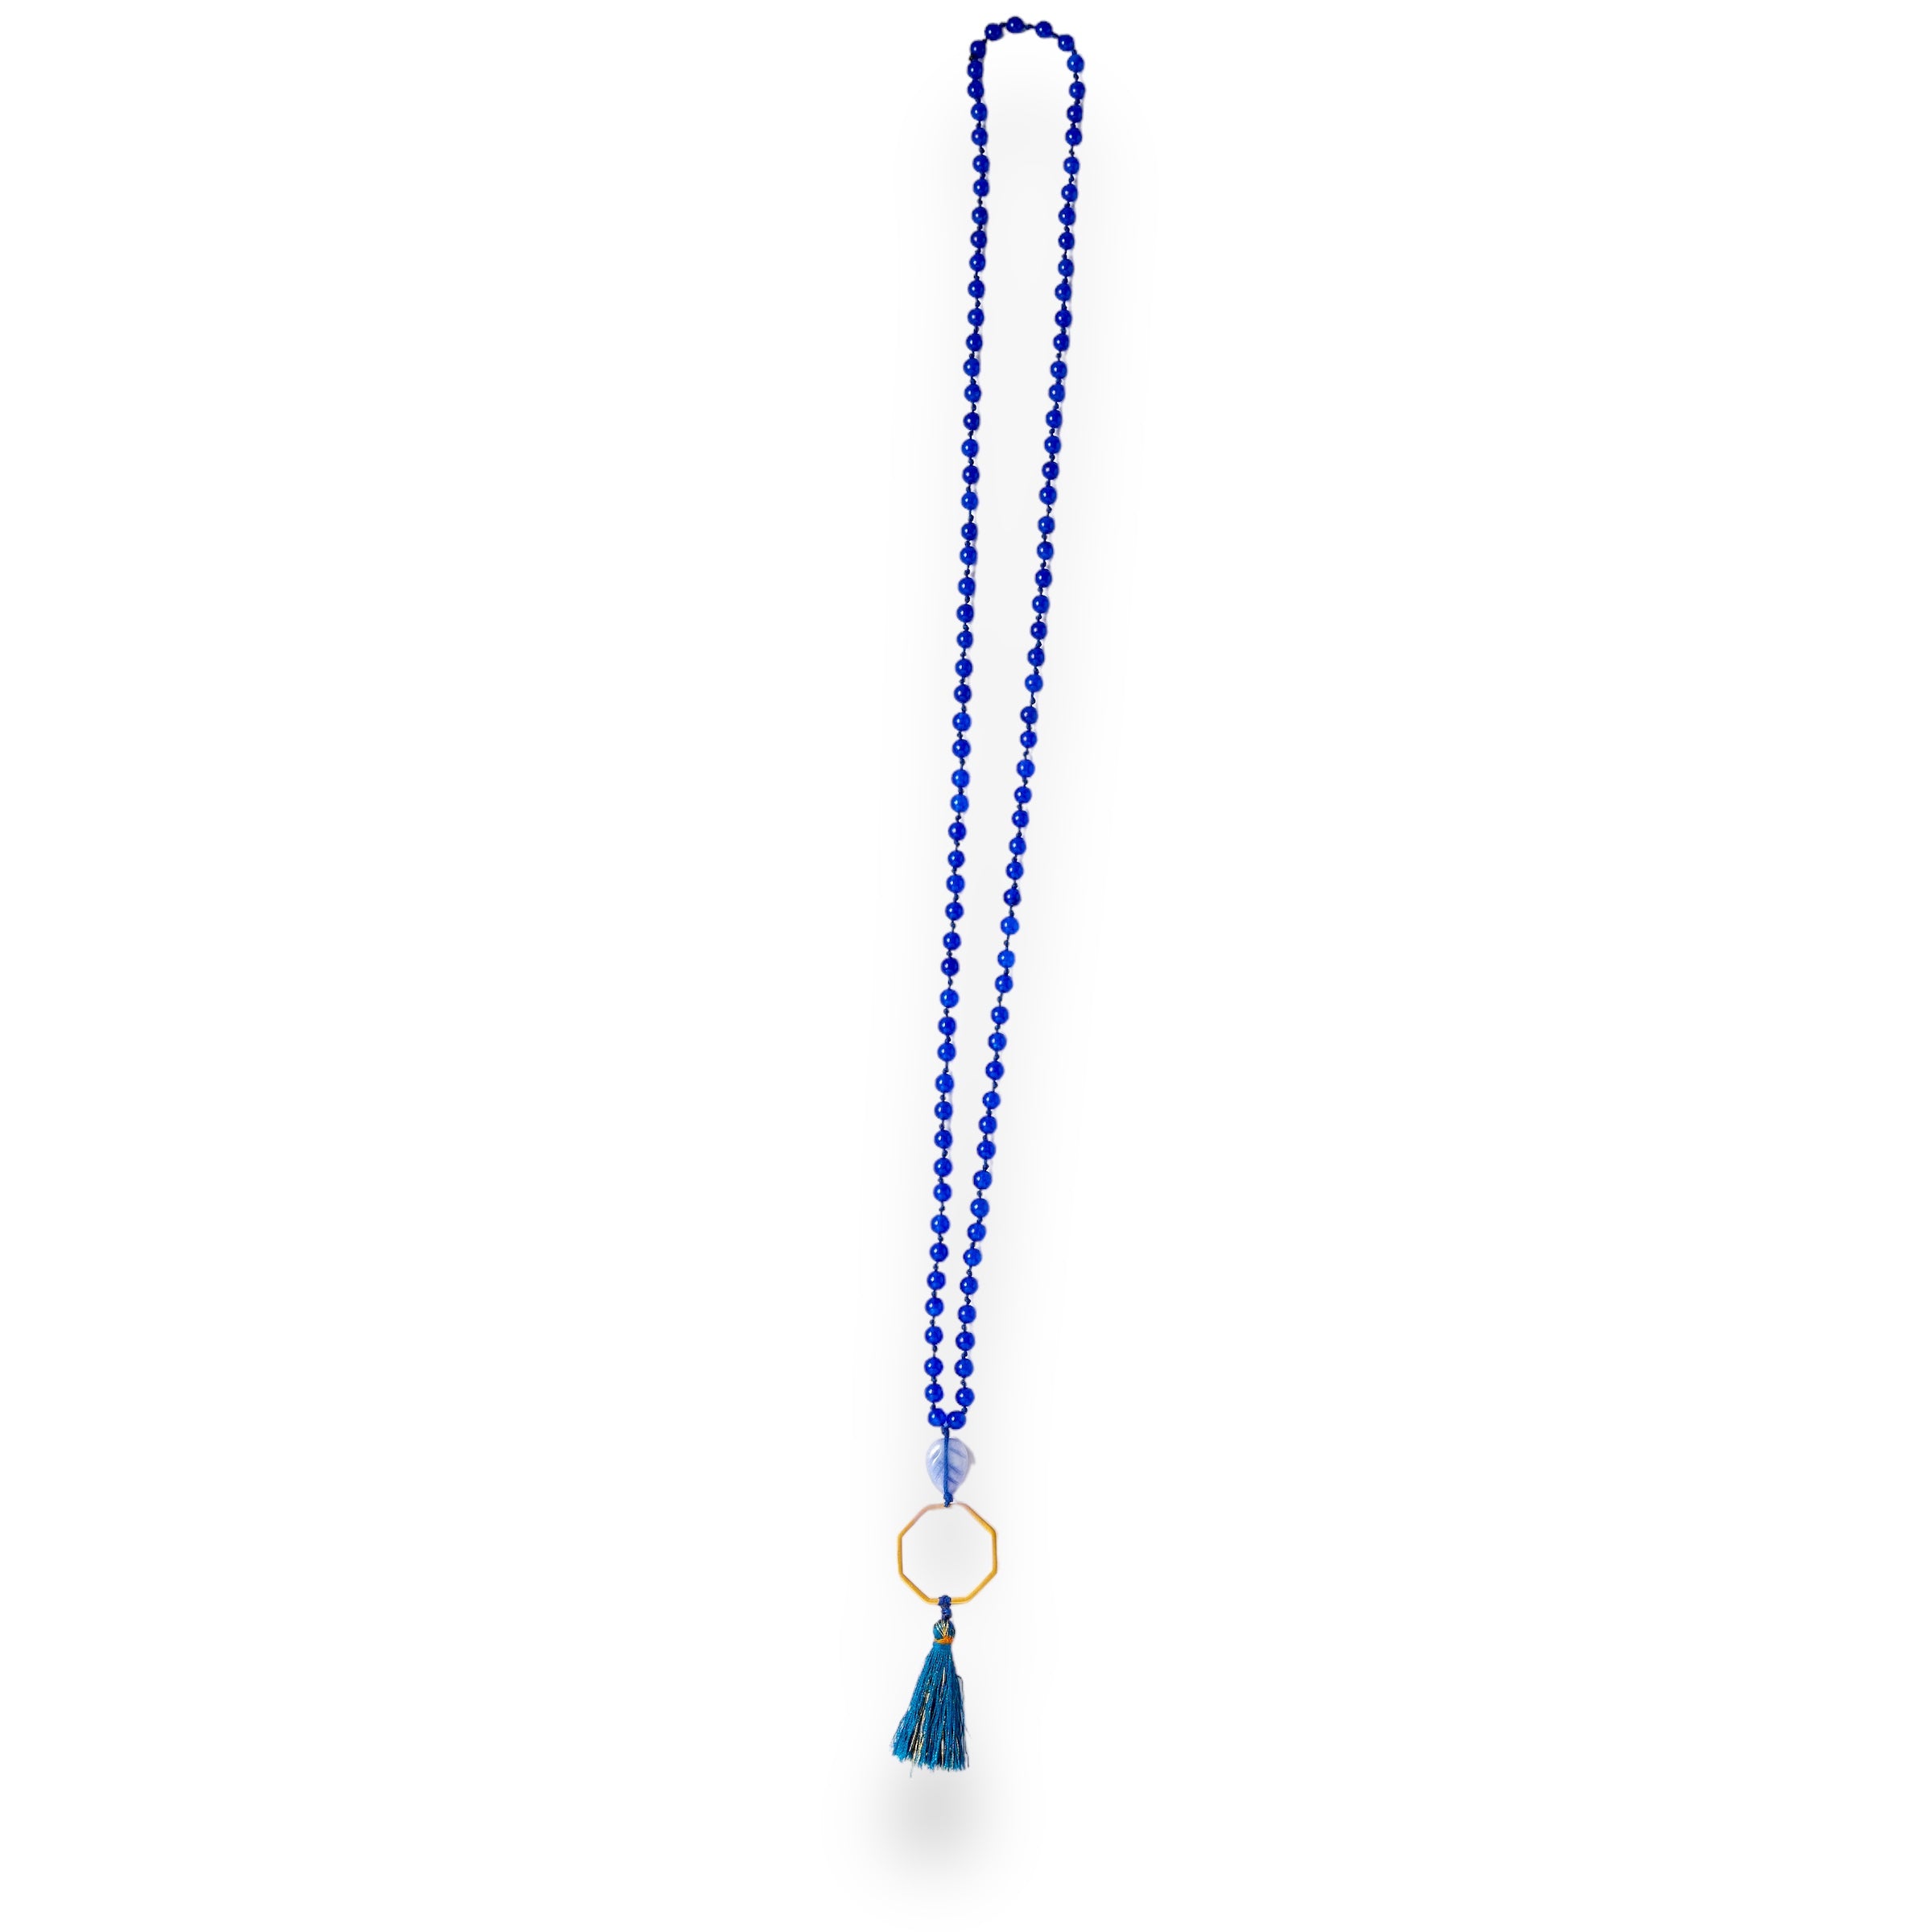 Calm Waters Mala Necklace